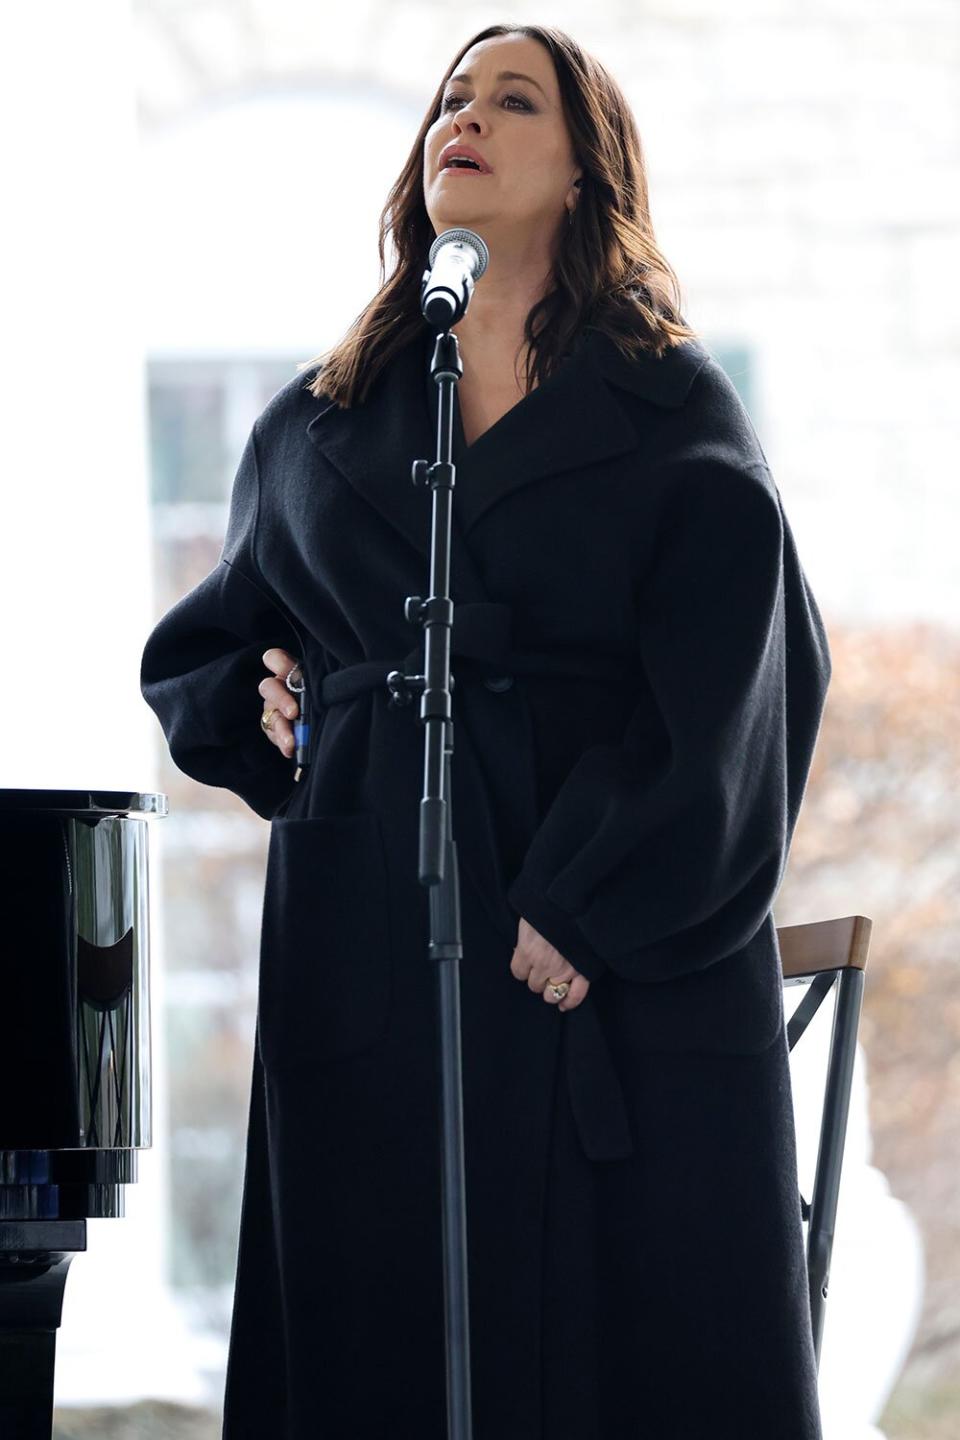 MEMPHIS, TENNESSEE - JANUARY 22: Alanis Morissette performs onstage at the public memorial for Lisa Marie Presley on January 22, 2023 in Memphis, Tennessee. Presley, 54, the only child of American singer Elvis Presley, died January 12, 2023 in Los Angeles. (Photo by Jason Kempin/Getty Images)